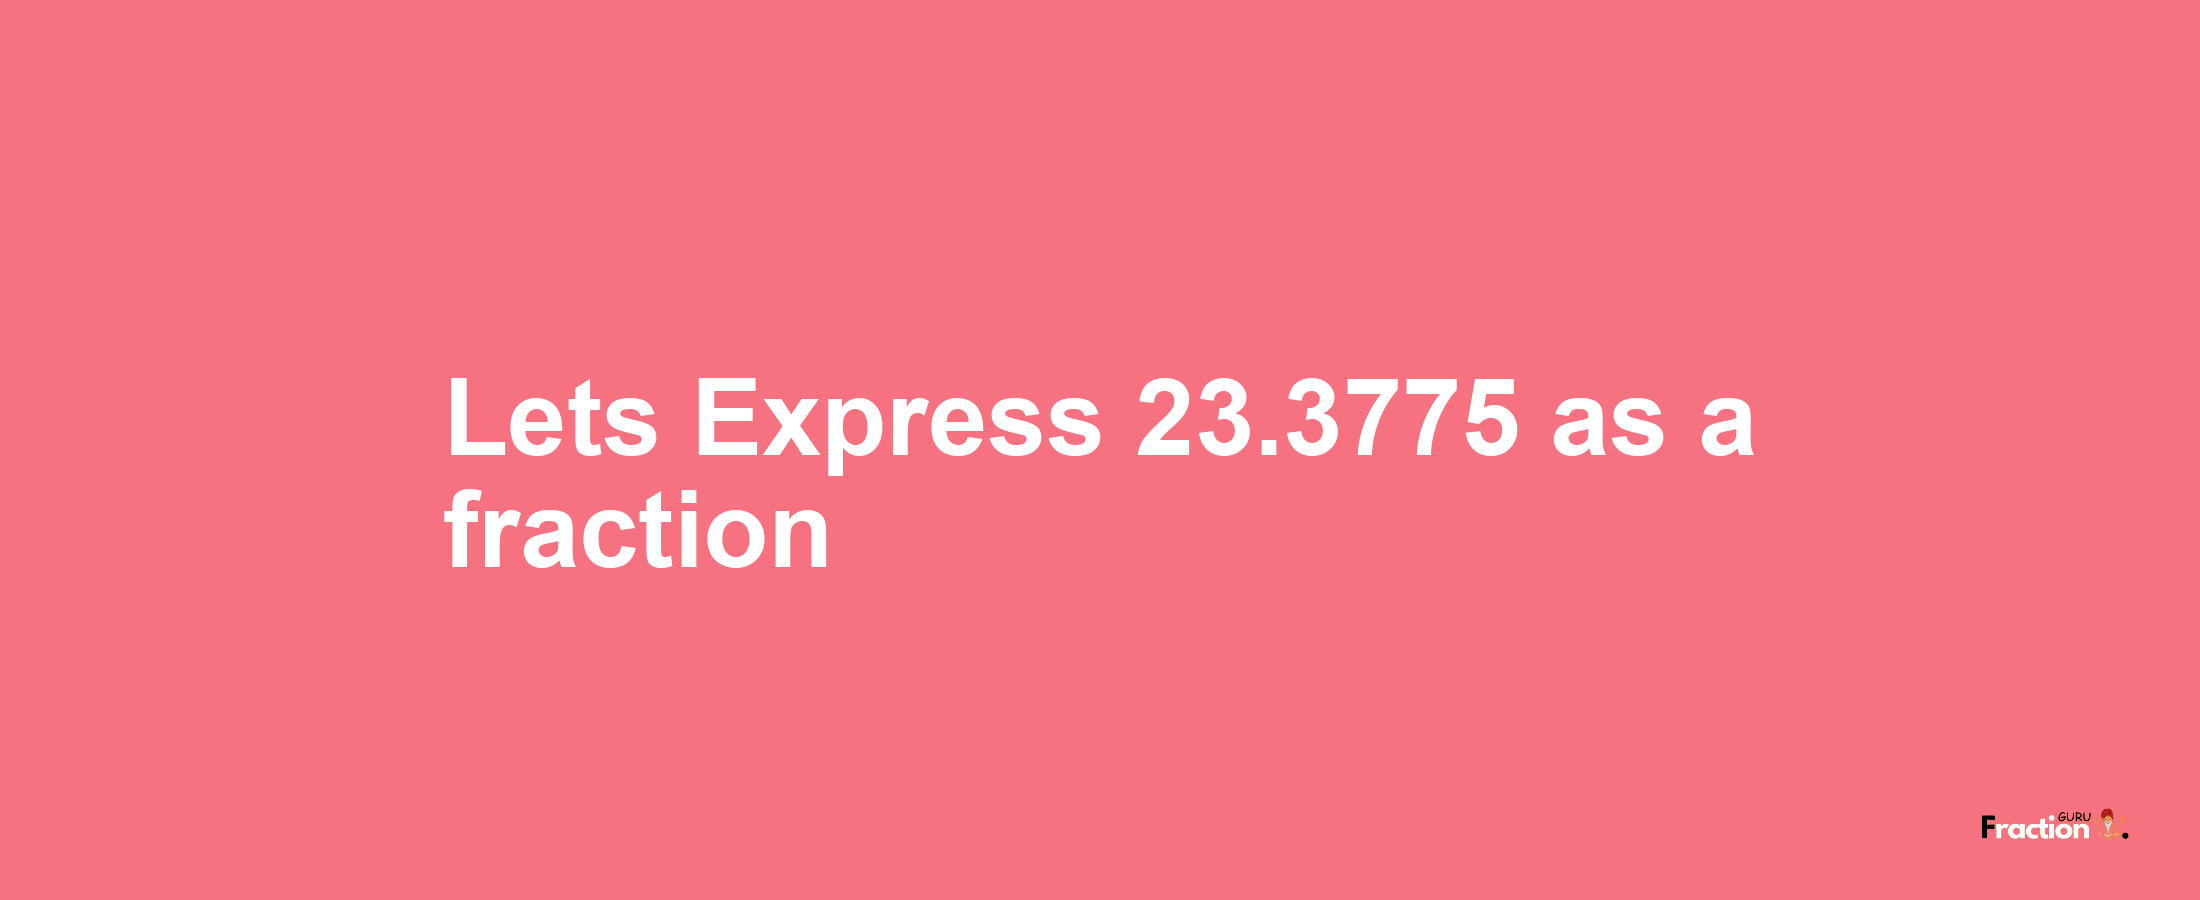 Lets Express 23.3775 as afraction